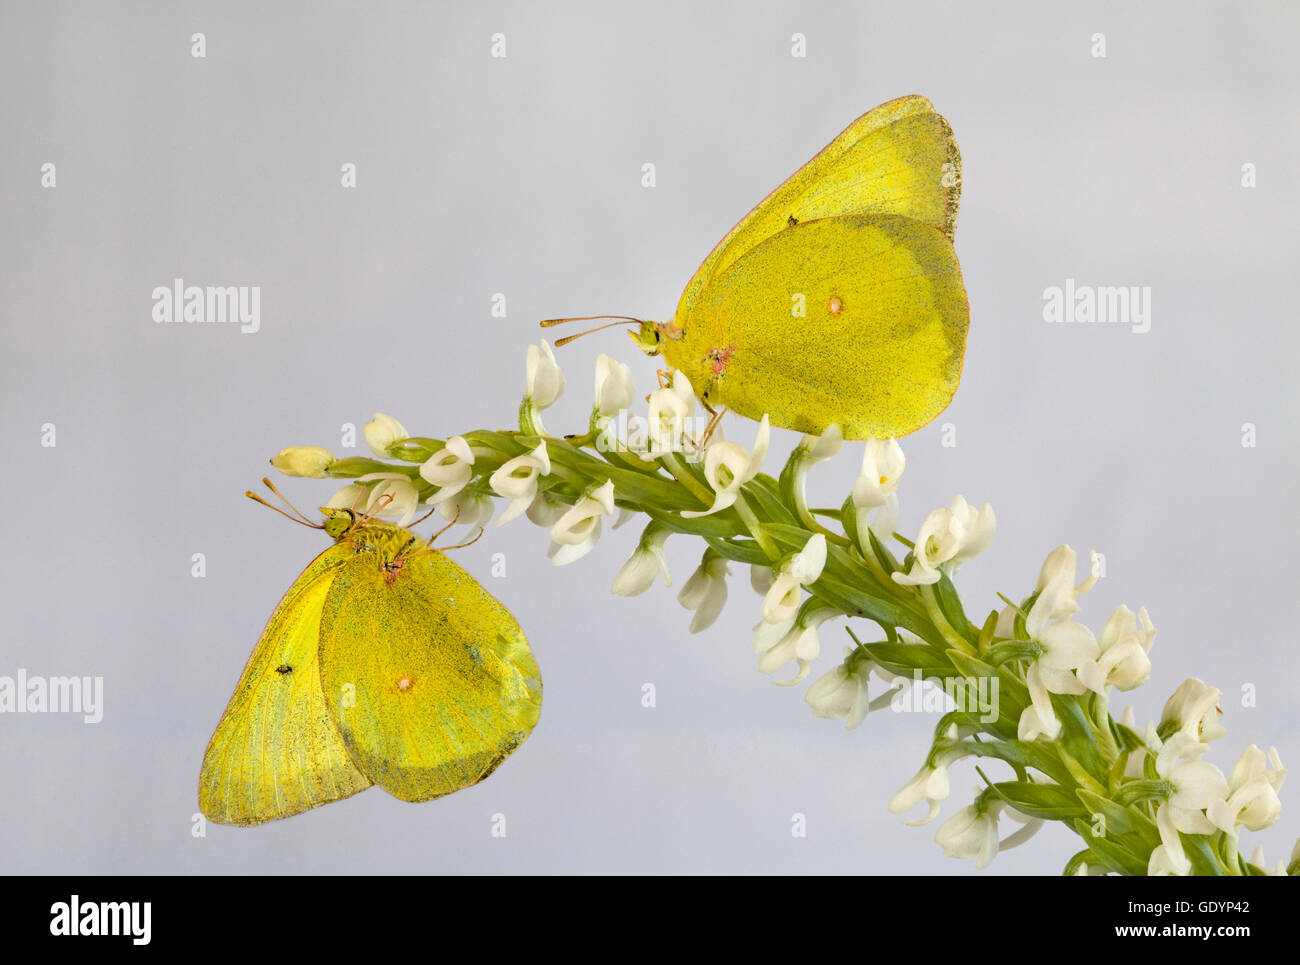 A clouded sulphur butterfly, Colias philodice, taking nectar from a flower Stock Photo